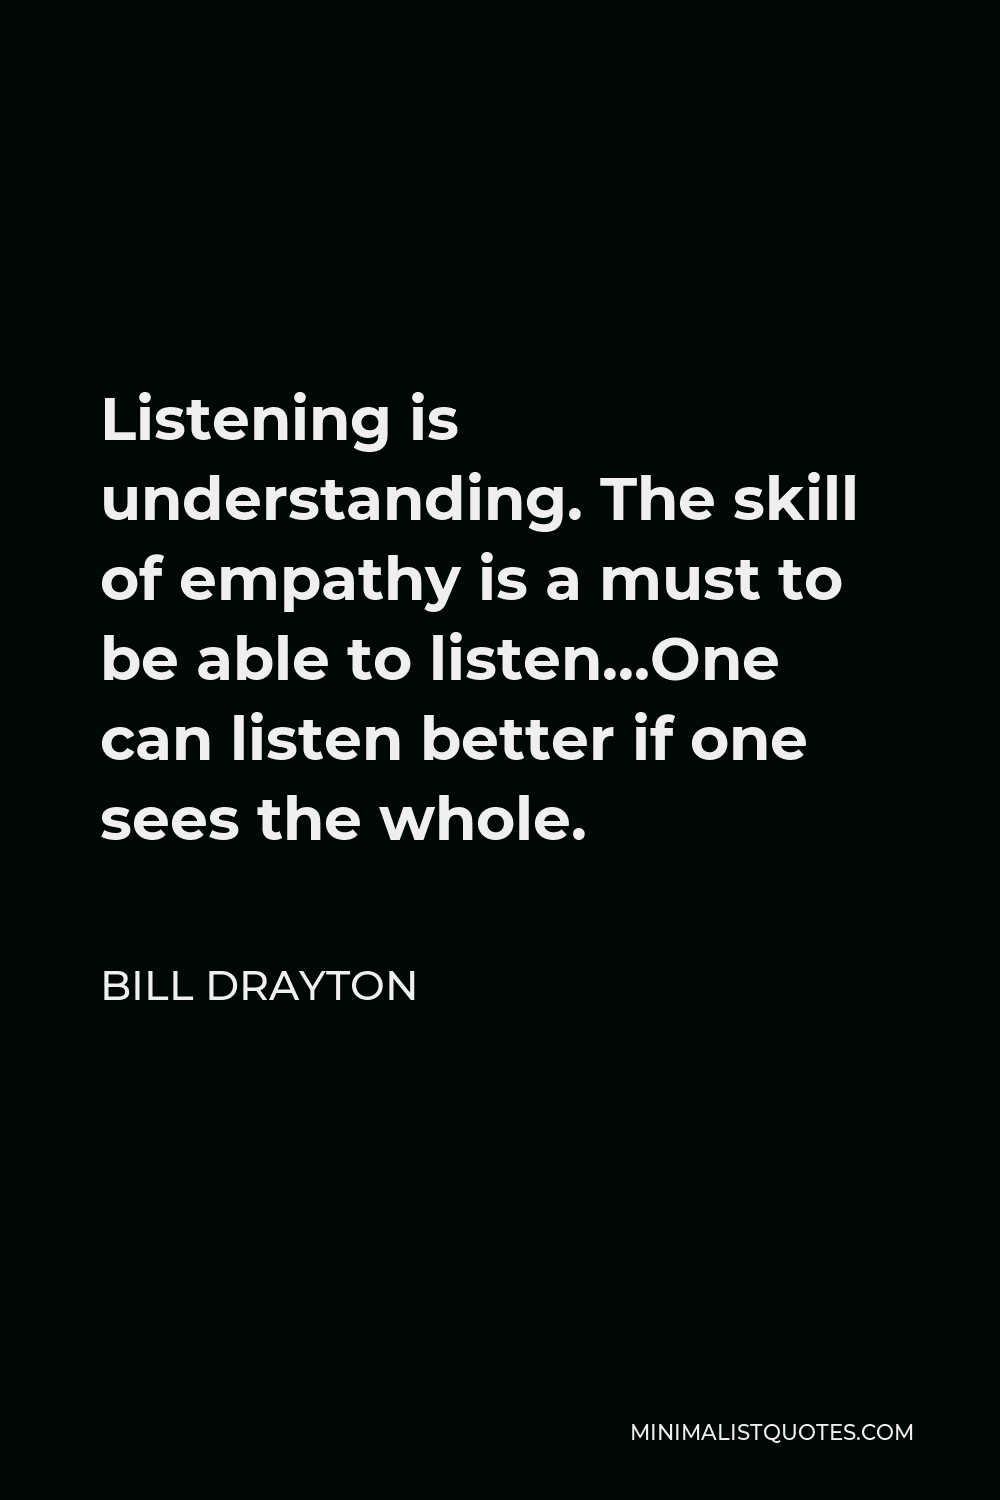 Bill Drayton Quote - Listening is understanding. The skill of empathy is a must to be able to listen…One can listen better if one sees the whole.